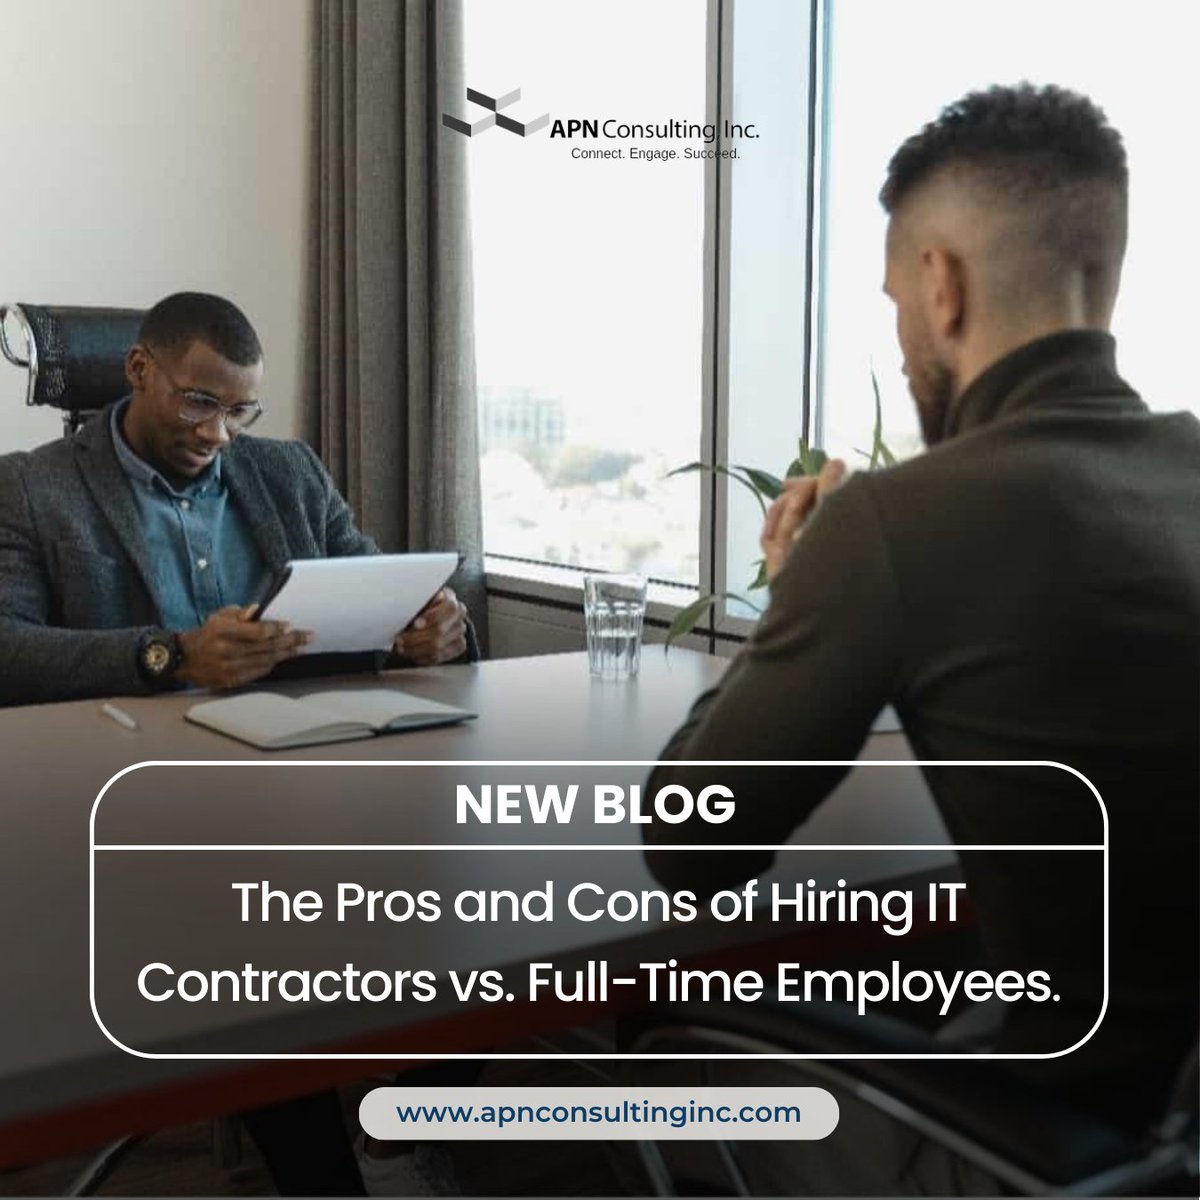 Build an Agile Workforce with Contractors and Full-Timers
Assembling a technology team involves balancing stability with flexibility. Full-time hires provide institutional knowledge.  

#ITStaffing #StaffingSolutions #TechnologyRecruitment #ITConsulting #TechTalent